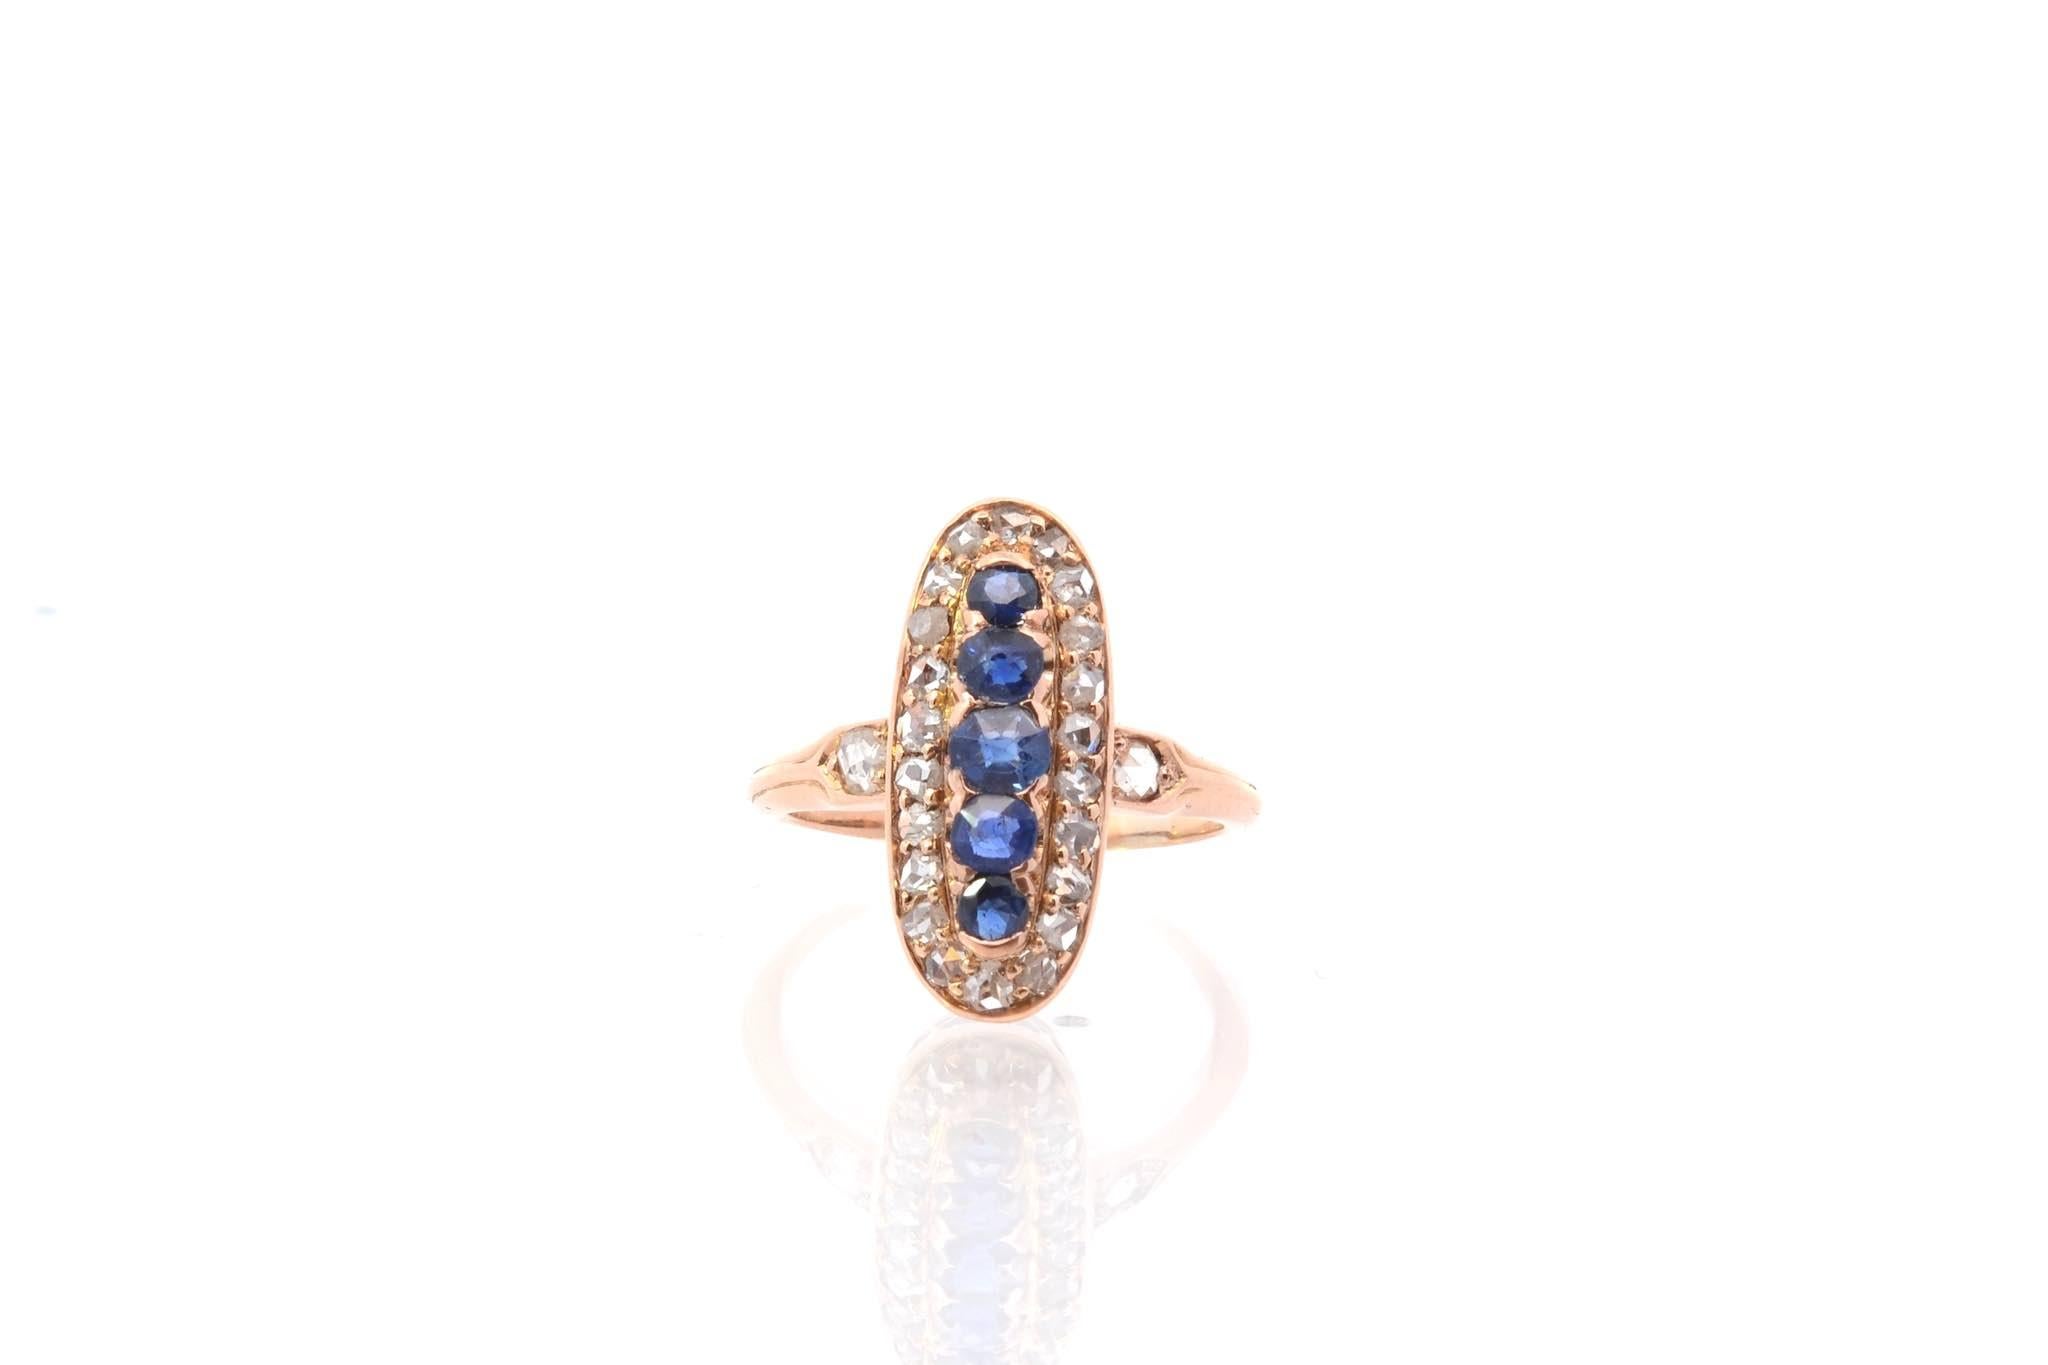 Stones: 5 sapphires: 0.89 ct and 24 rose diamonds: 0.48 ct
Material: 18k gold
Weight: 3.5g
Period: 1900
Size: 51 (free sizing)
Certificate
Ref. : 25628